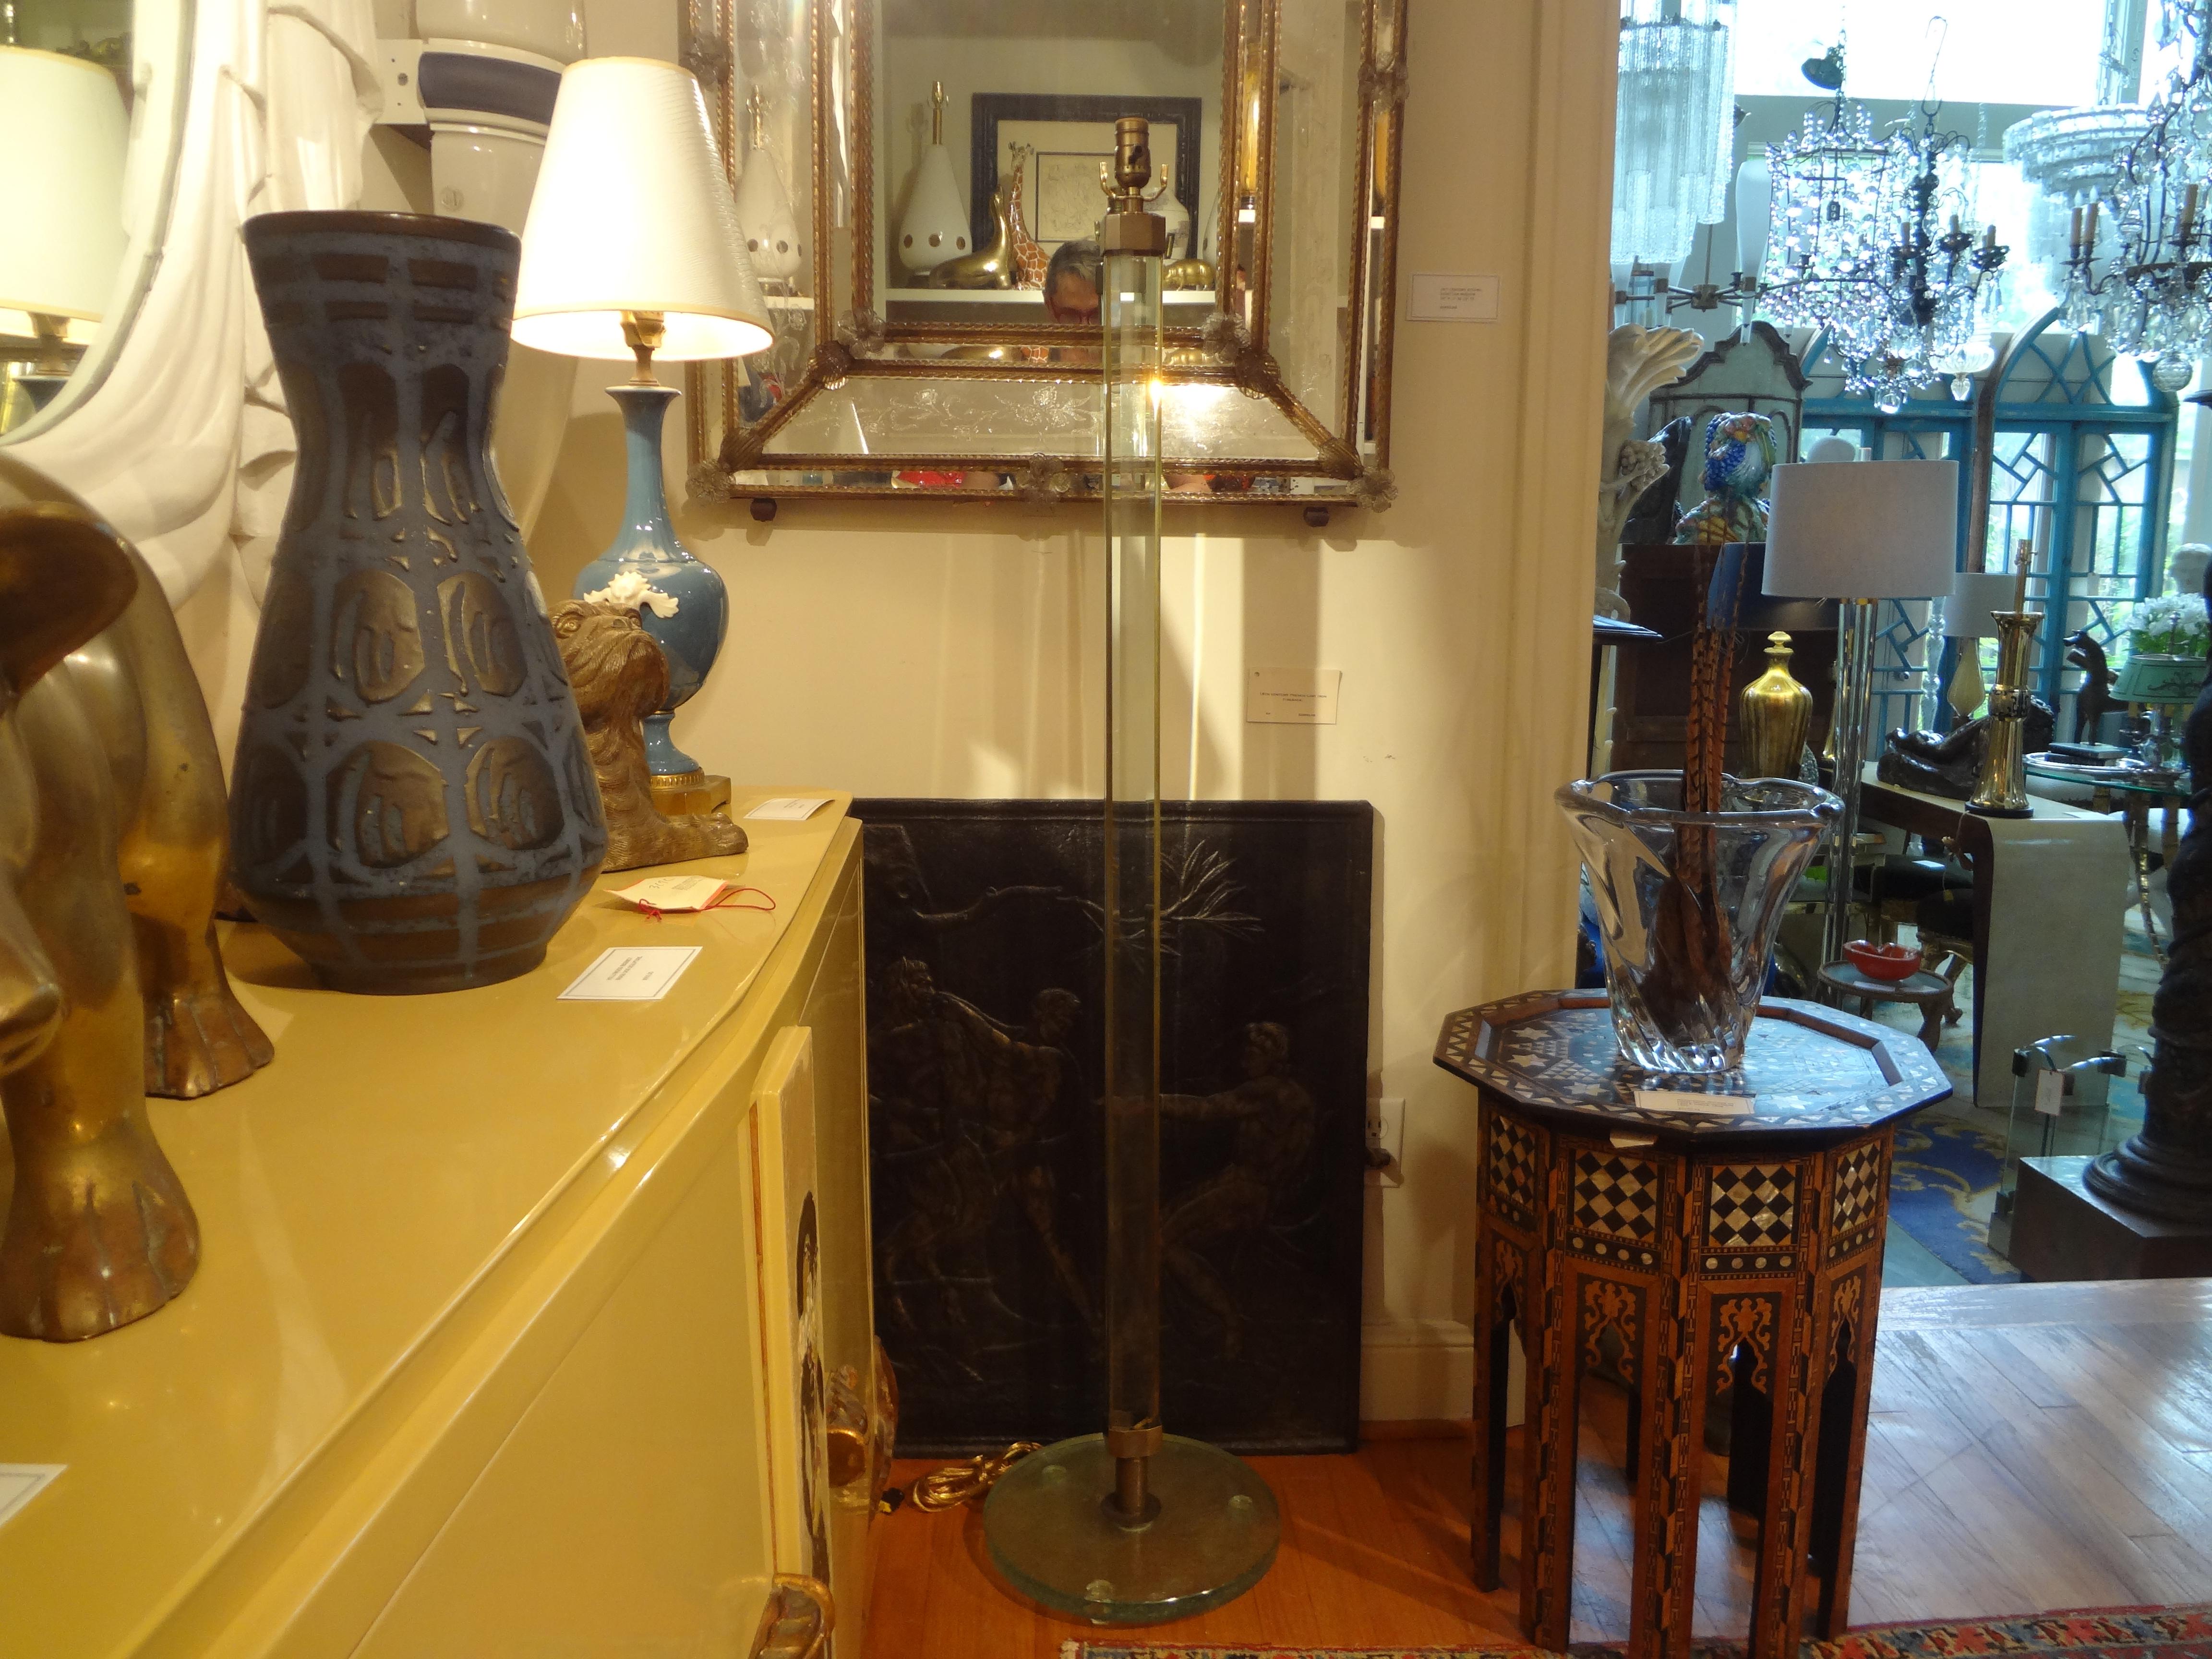 Italian Fontana Arte Attributed Glass And Bronze Floor Lamp.
This stunning Italian modern Max Ingrand For Fontana Arte attributed glass and brass floor lamp is executed of two thick pieces of glass with bronze between them on a thick round glass